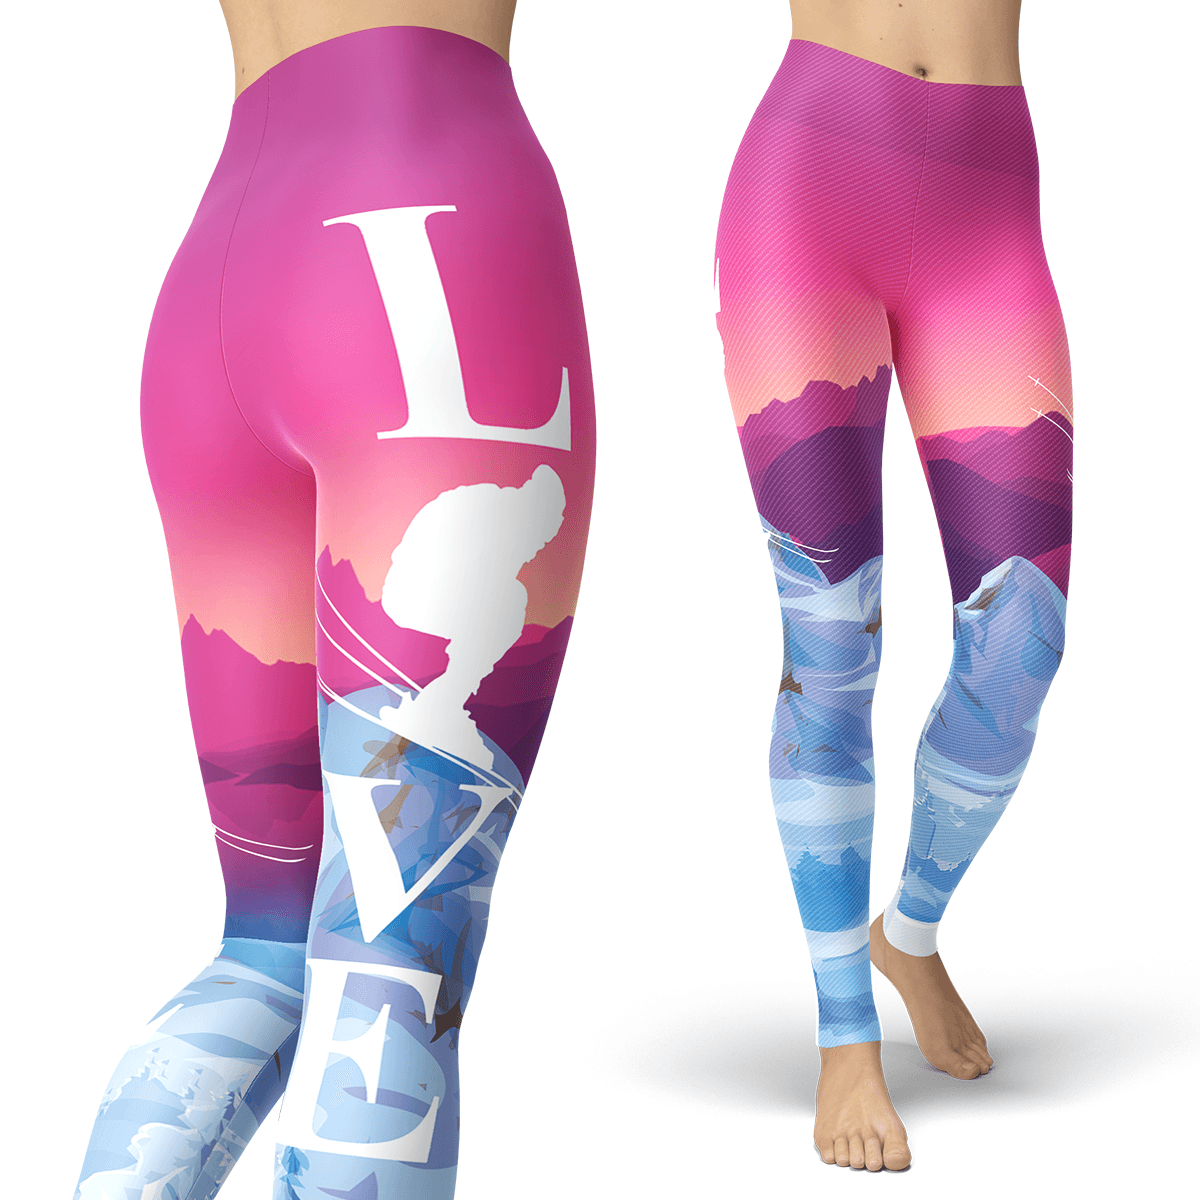 Thin Blue Line Stars and Stripes Below the Knees Leggings - Thin Blue Line  Shop